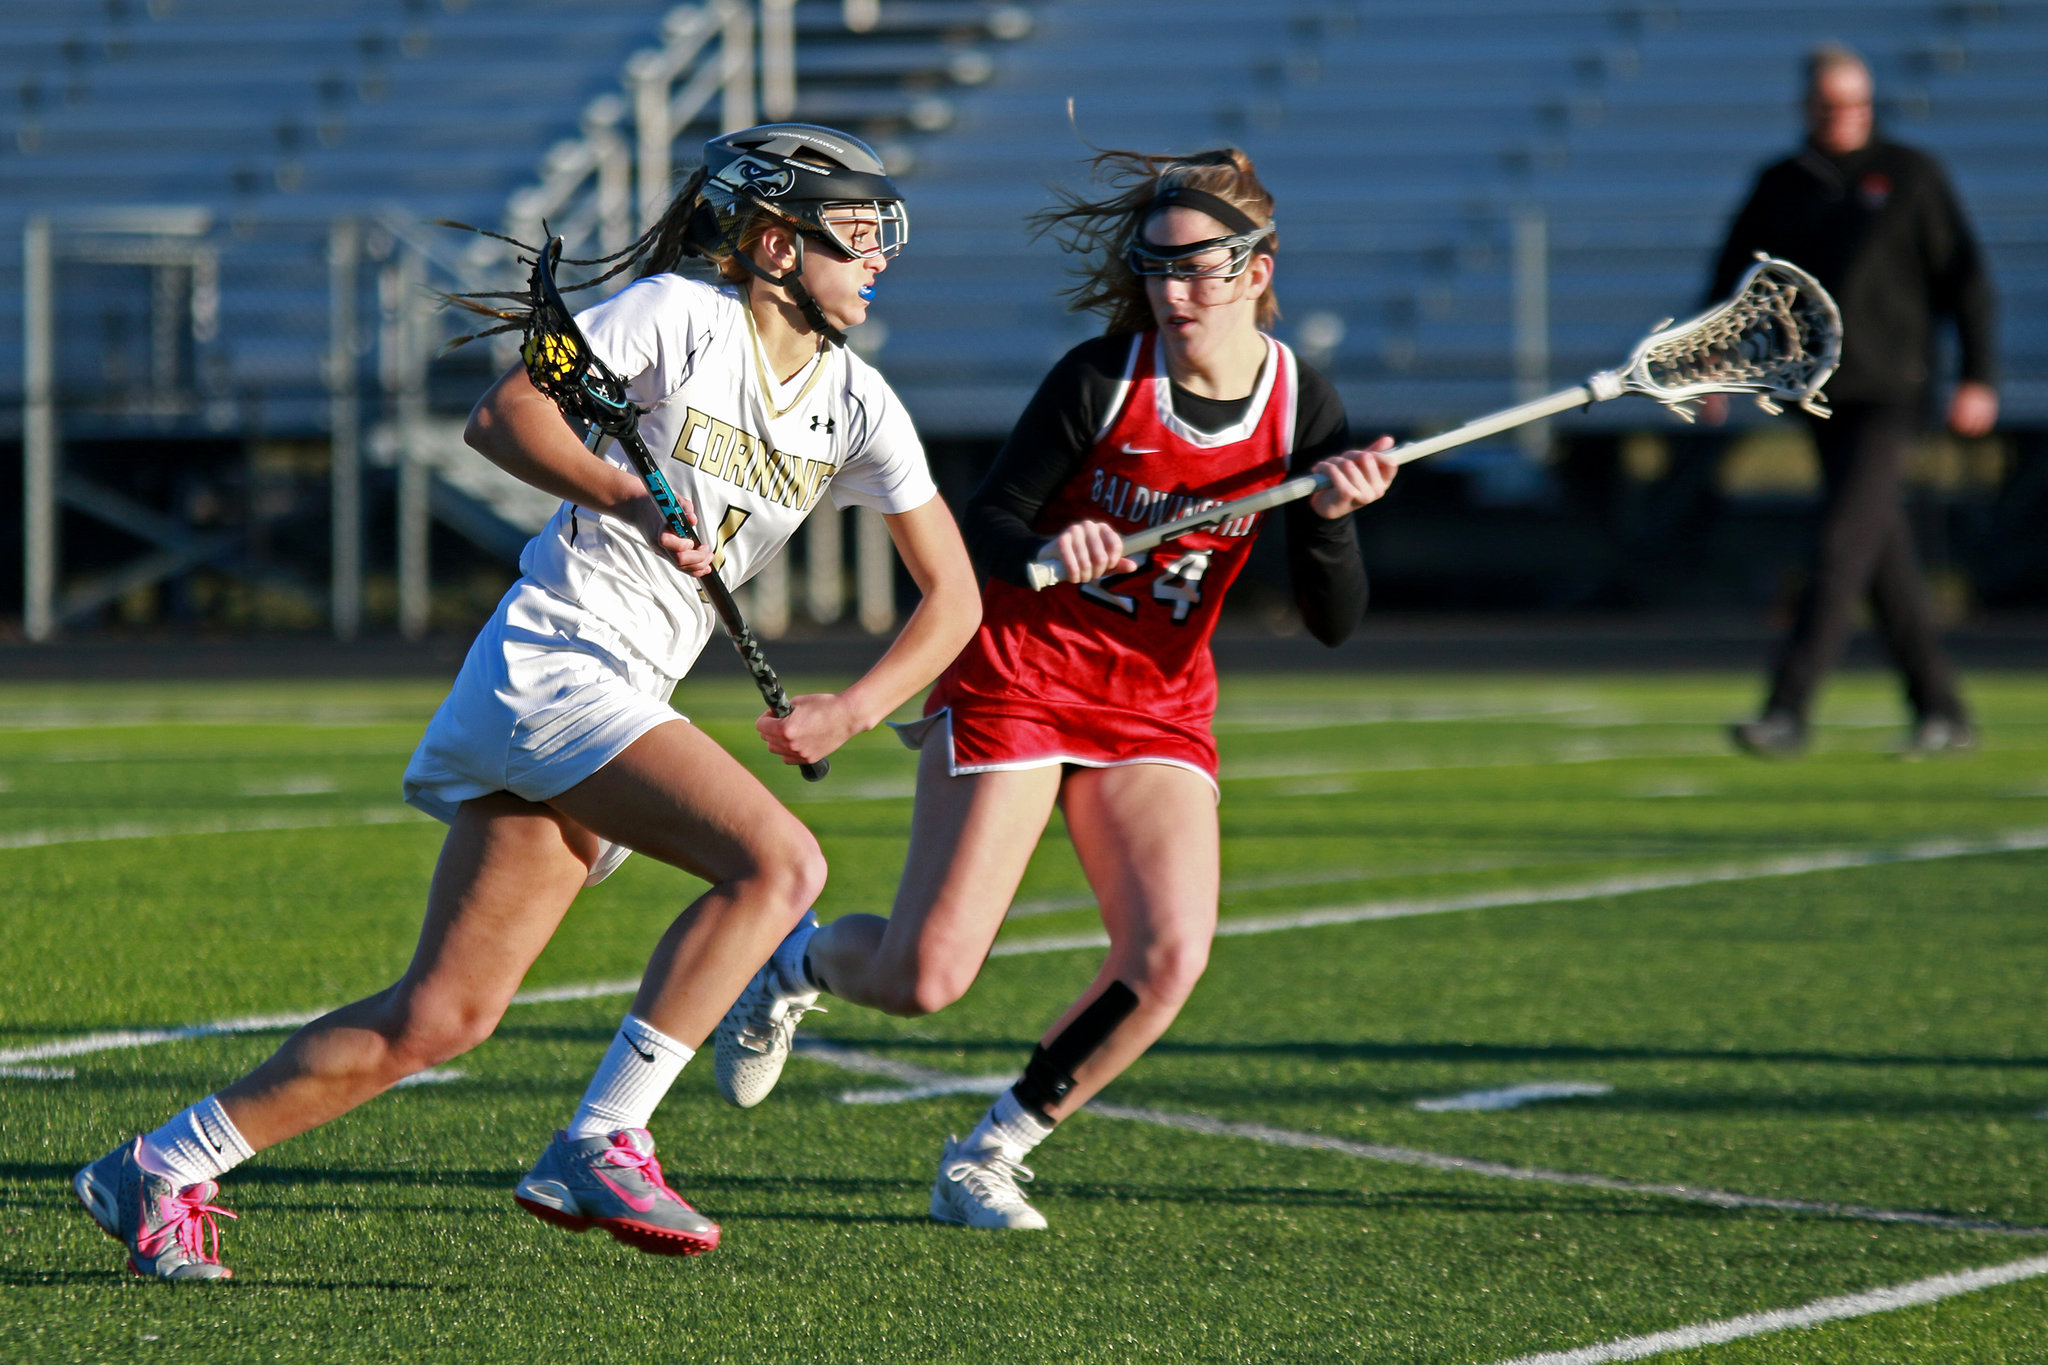 As Concussion Worries Rise, Girls' Lacrosse Turns to Headgear